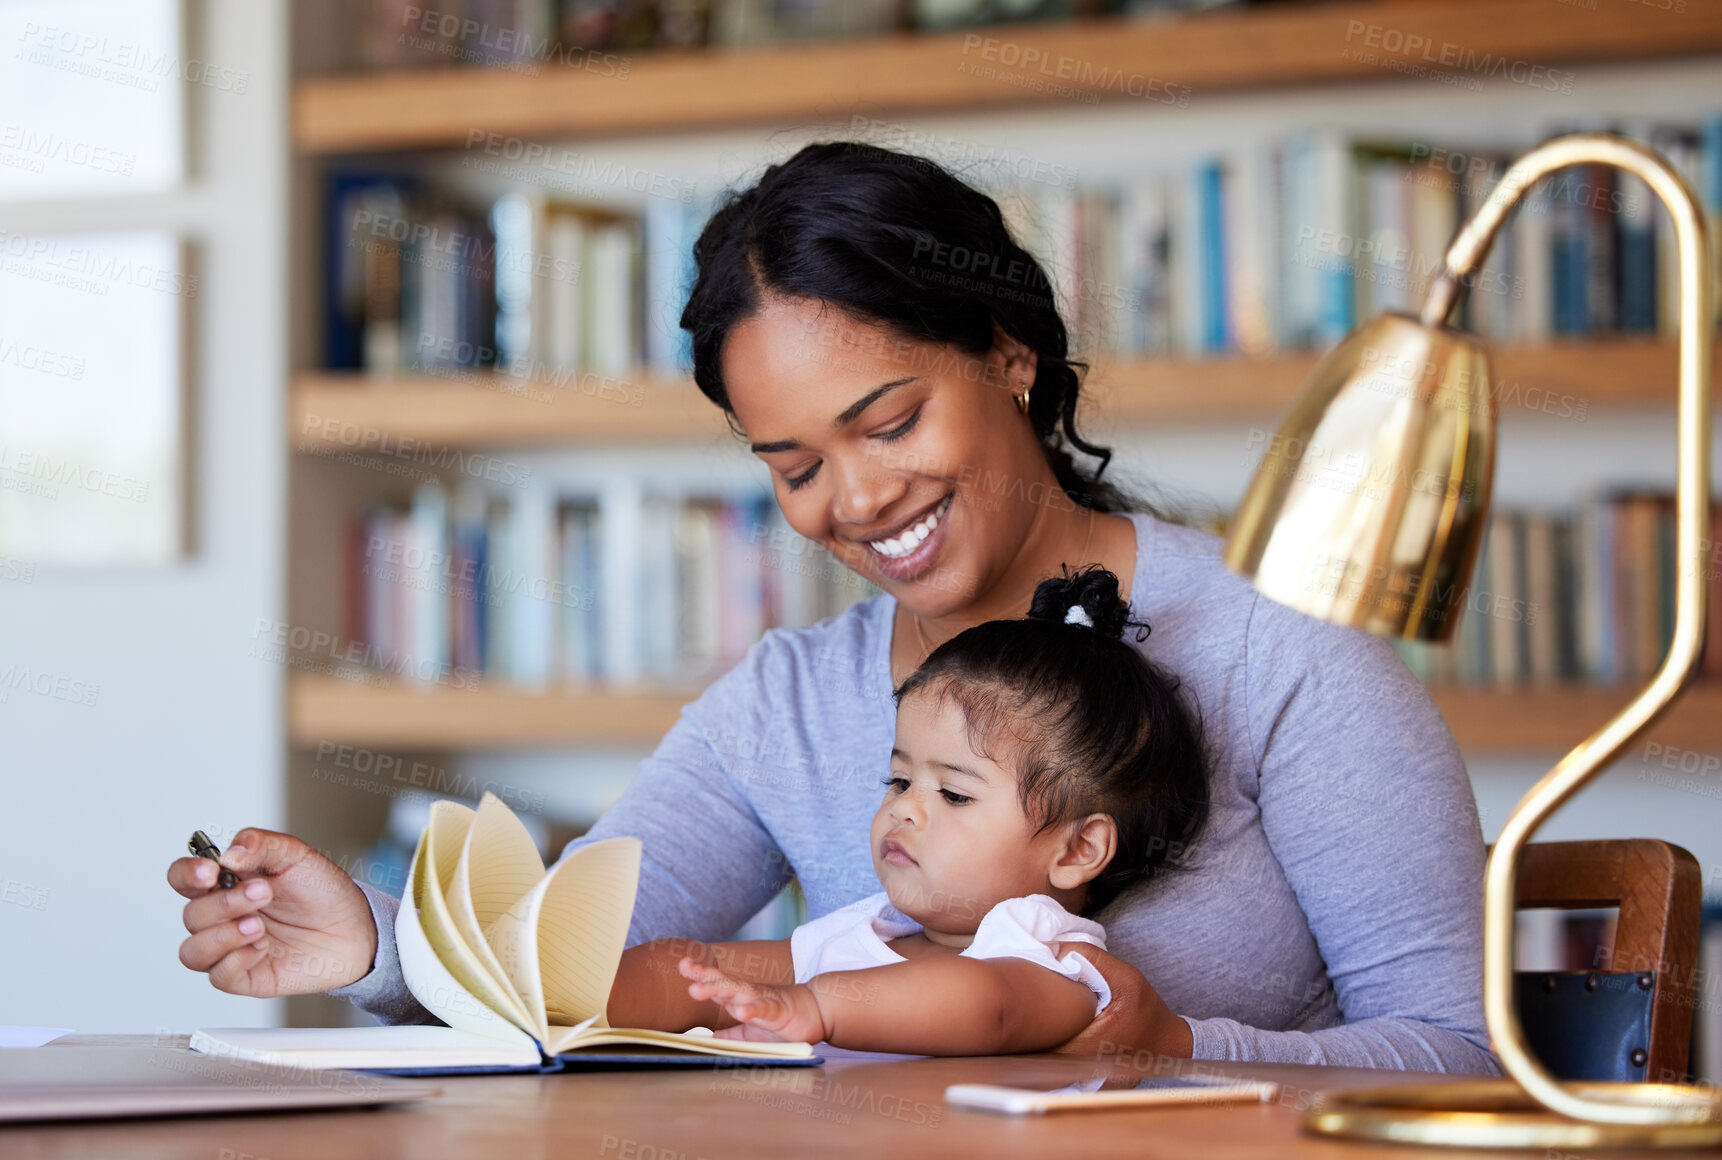 Buy stock photo Cheerful Mixed race mother sitting and smiling at a desk writing in a book with her baby daughter at home